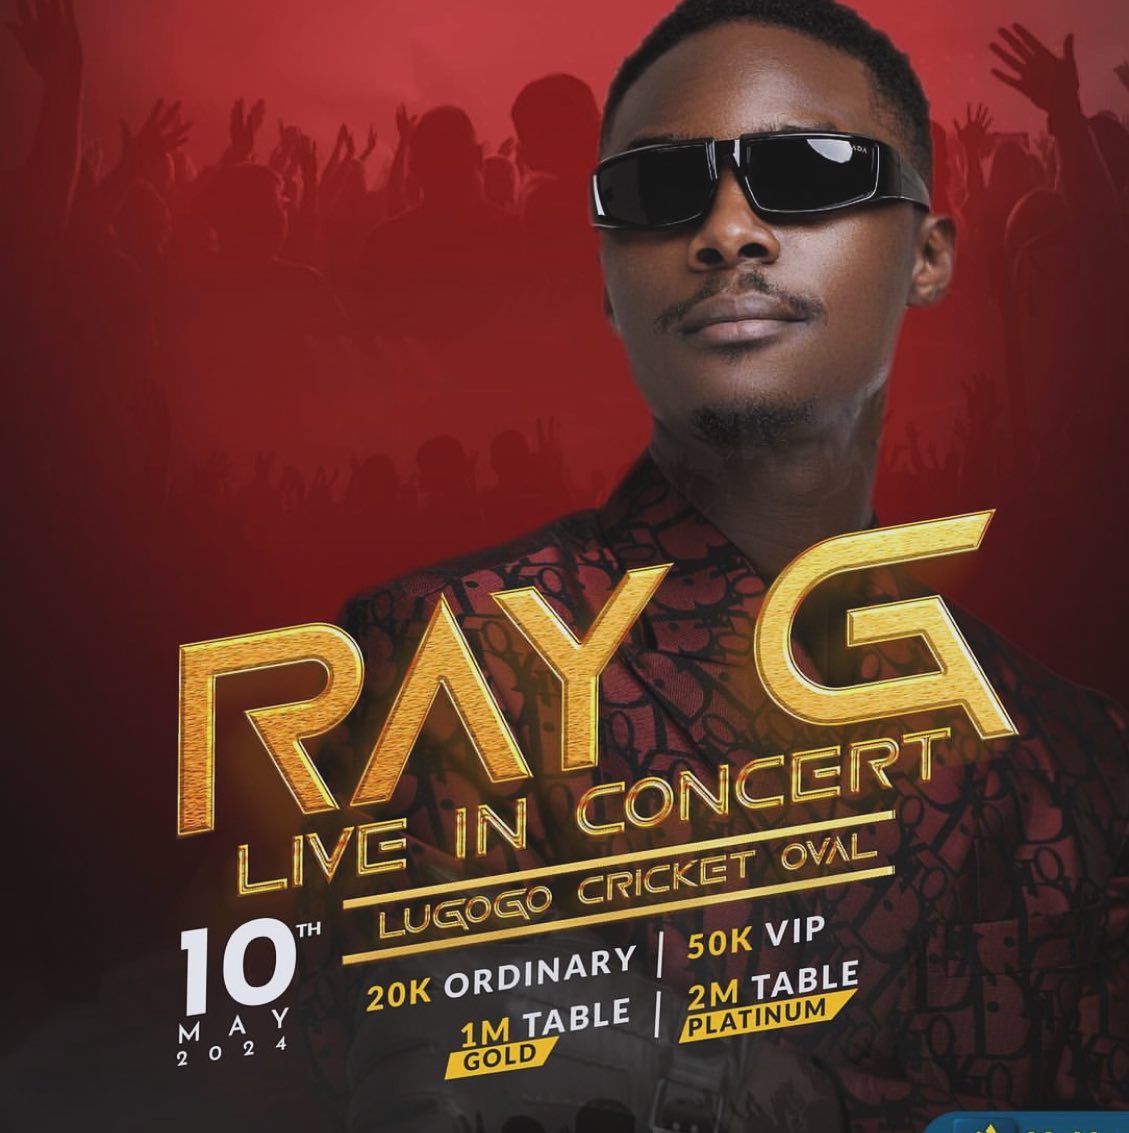 Immediately after Census, remember to pick your dancing shoes and run to Lugogo Cricket Oval...
#RayGLiveInConcert 
#ugandacensus